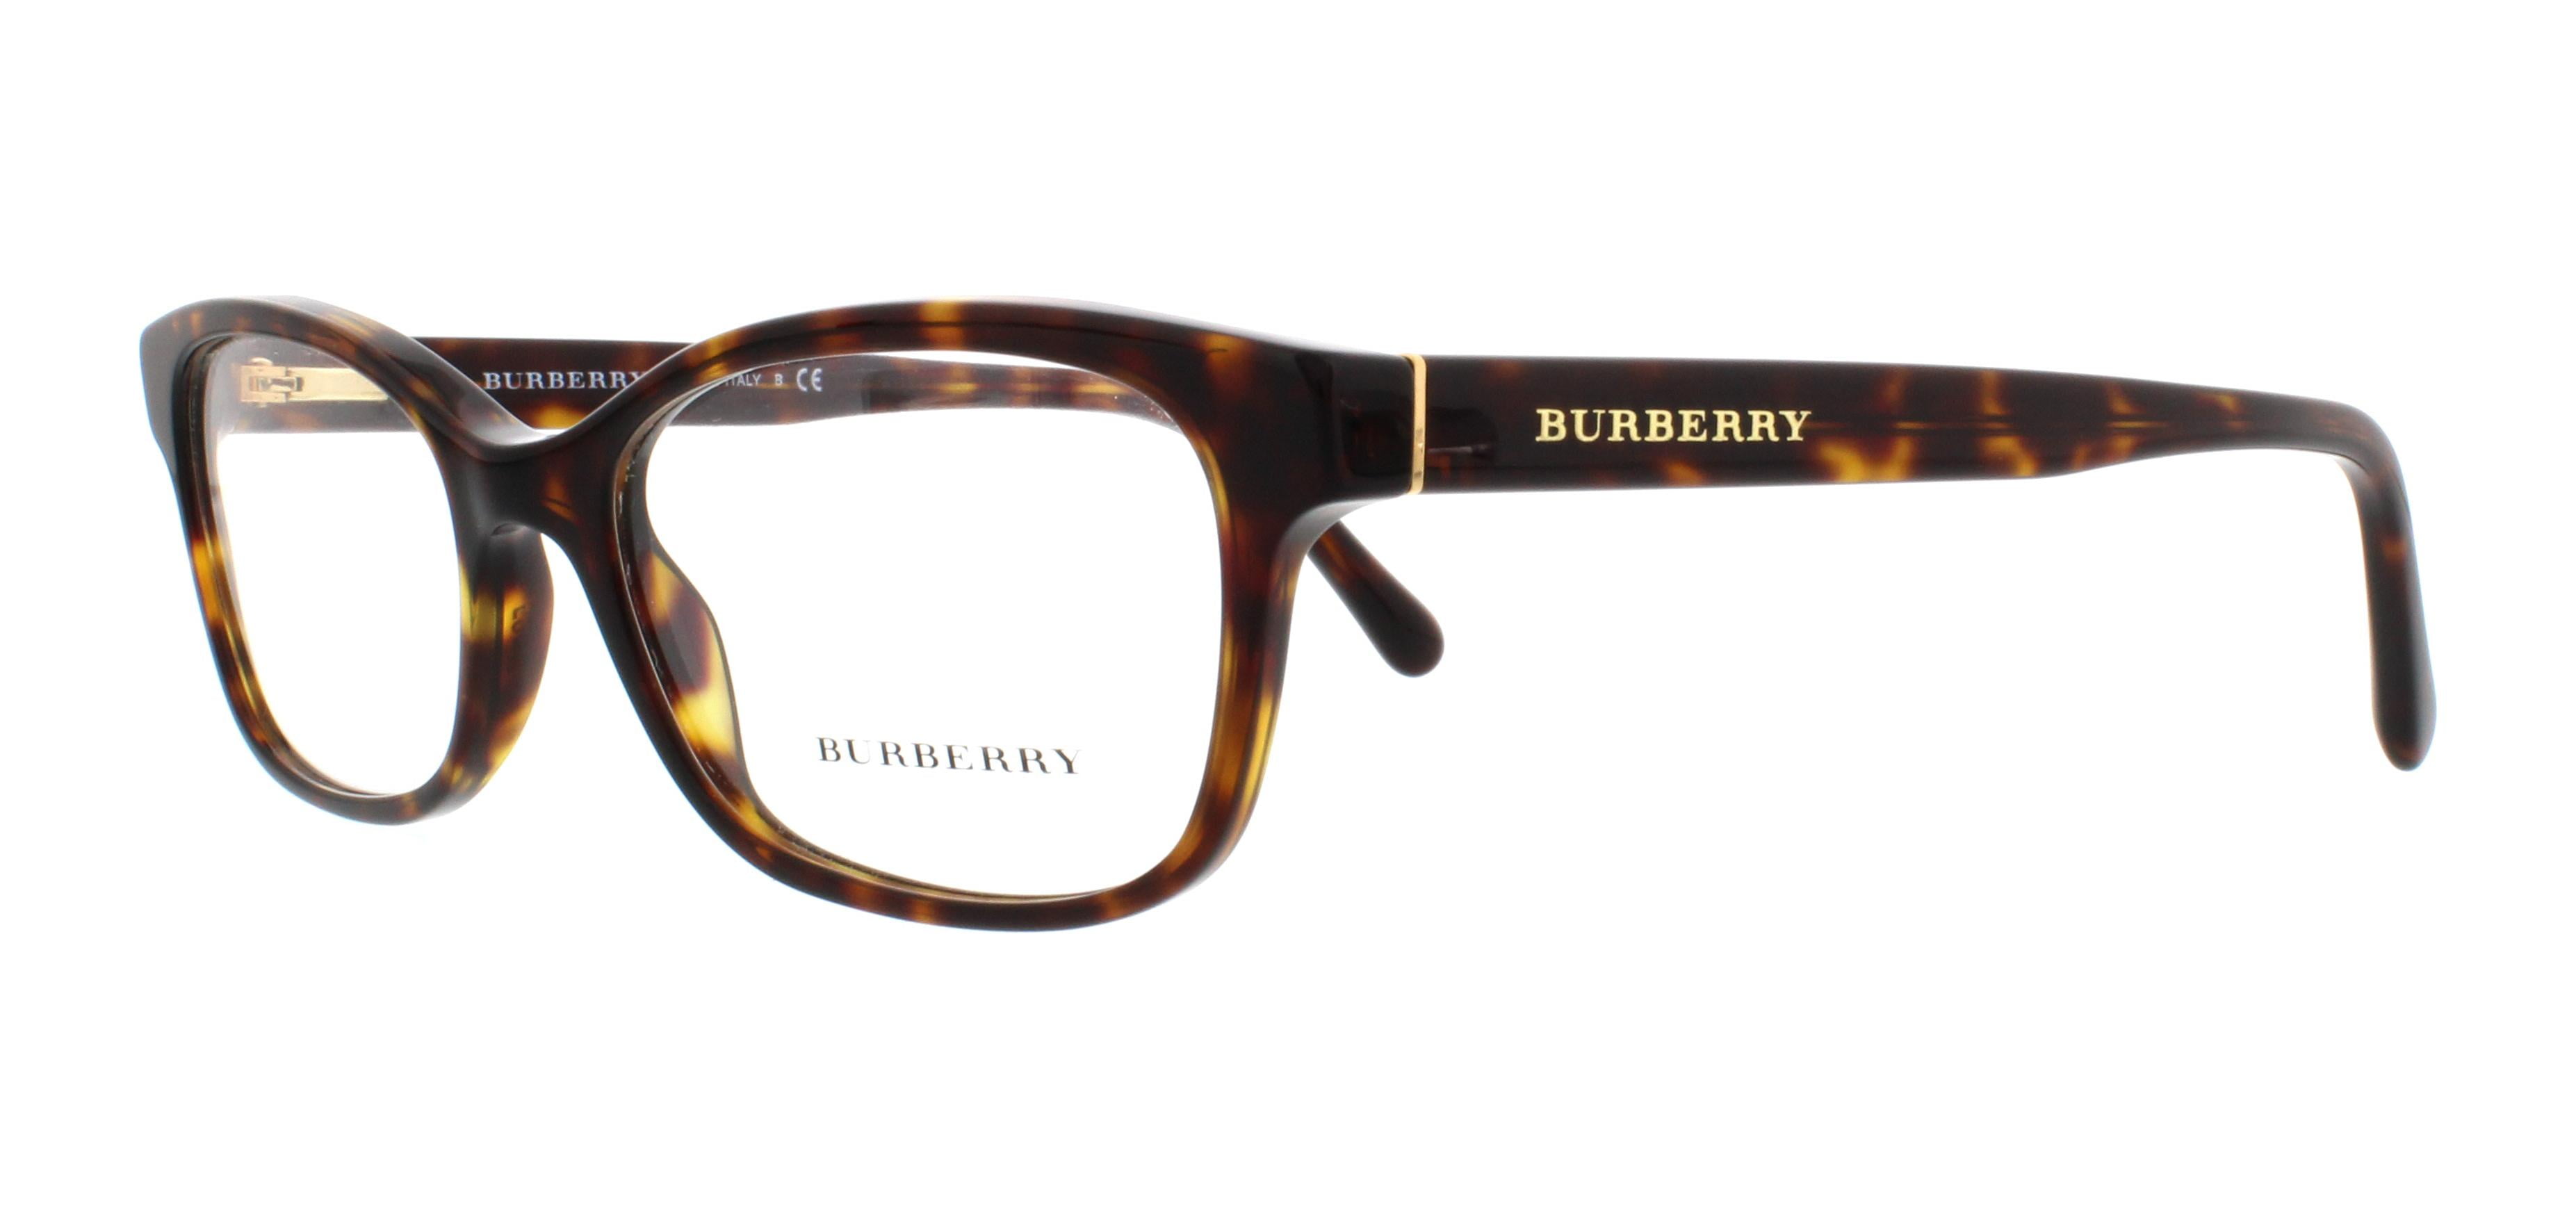 burberry be2201